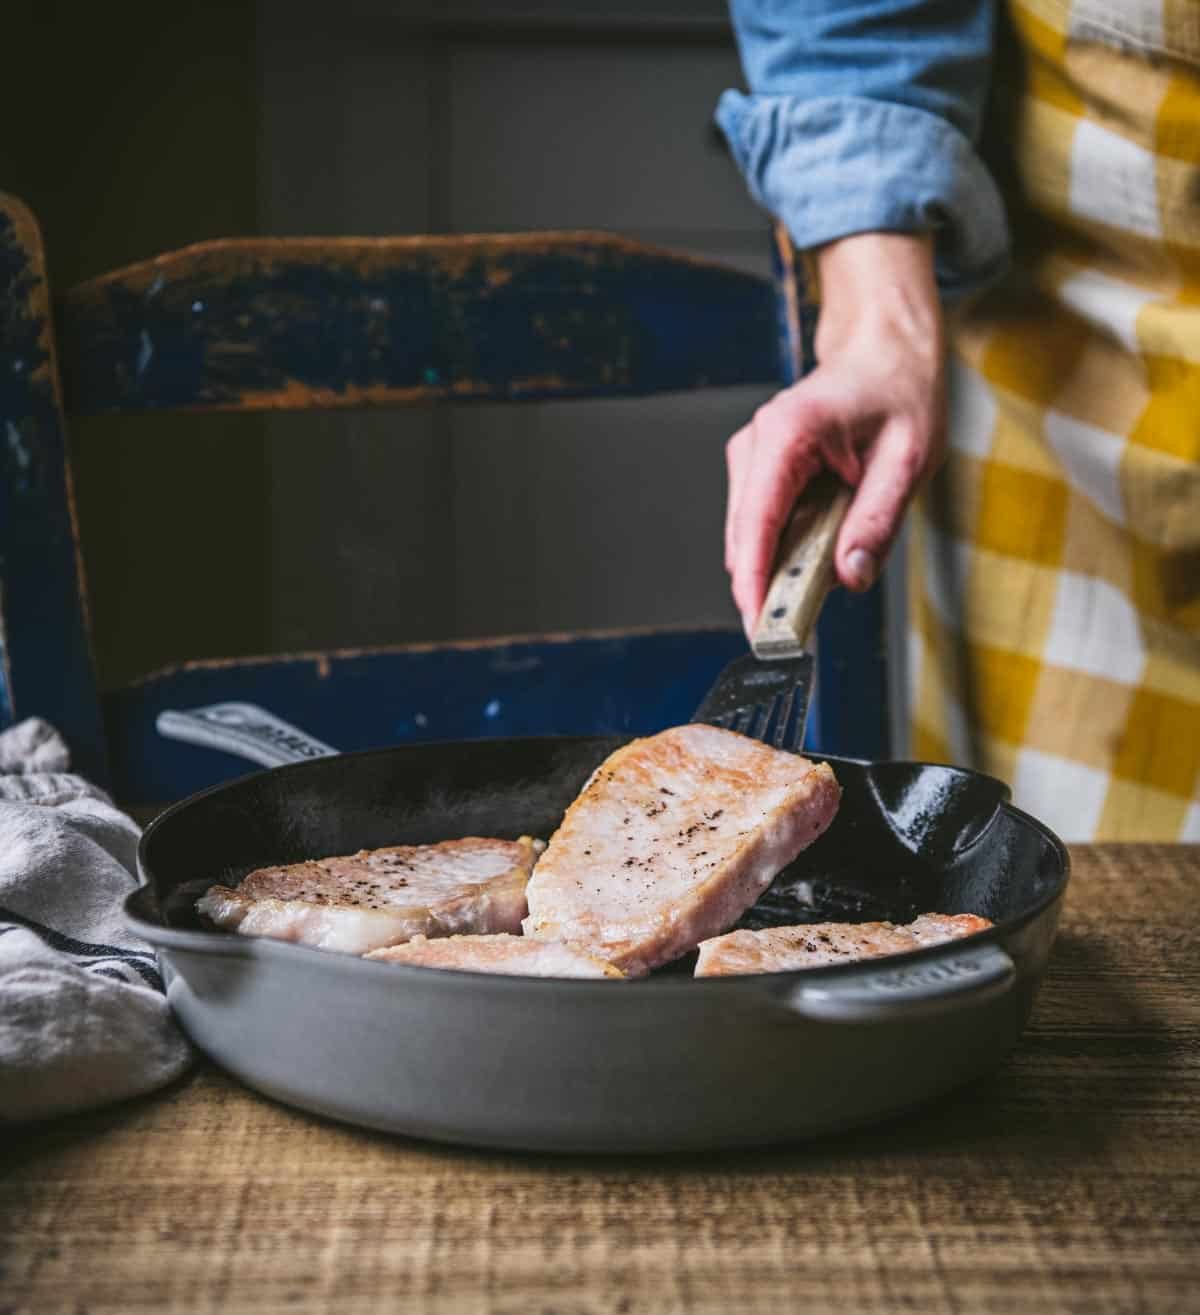 Pan frying pork chops in a cast iron skillet.